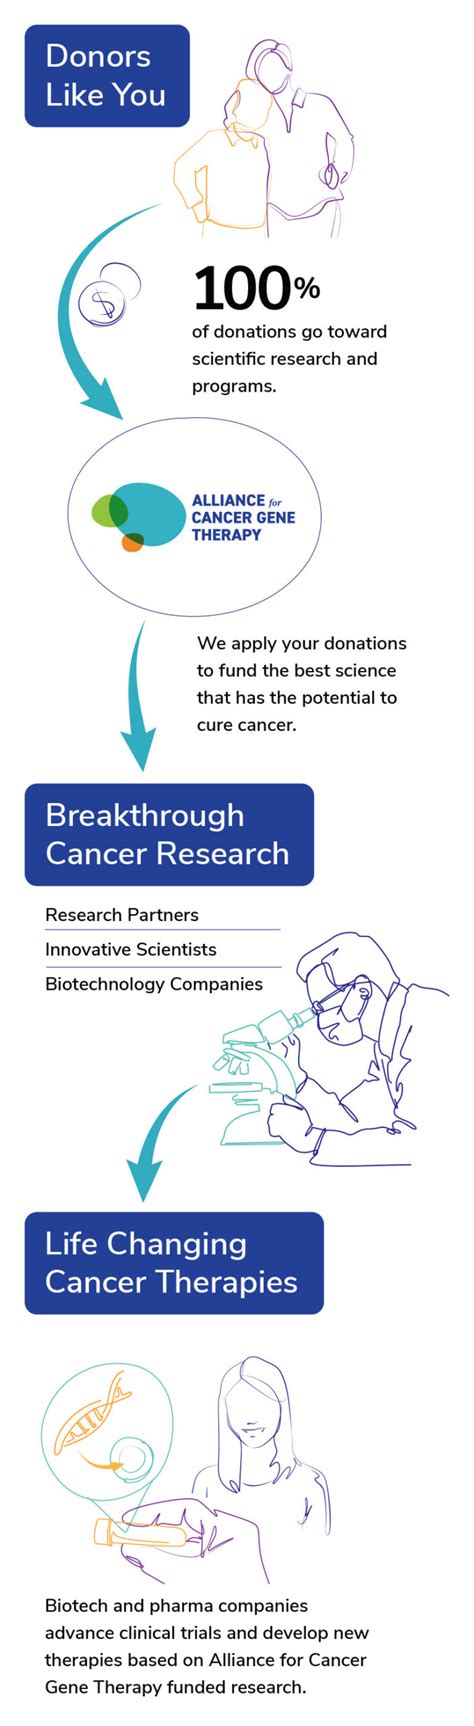 How We Use Your Donations Alliance For Cancer Gene Therapy